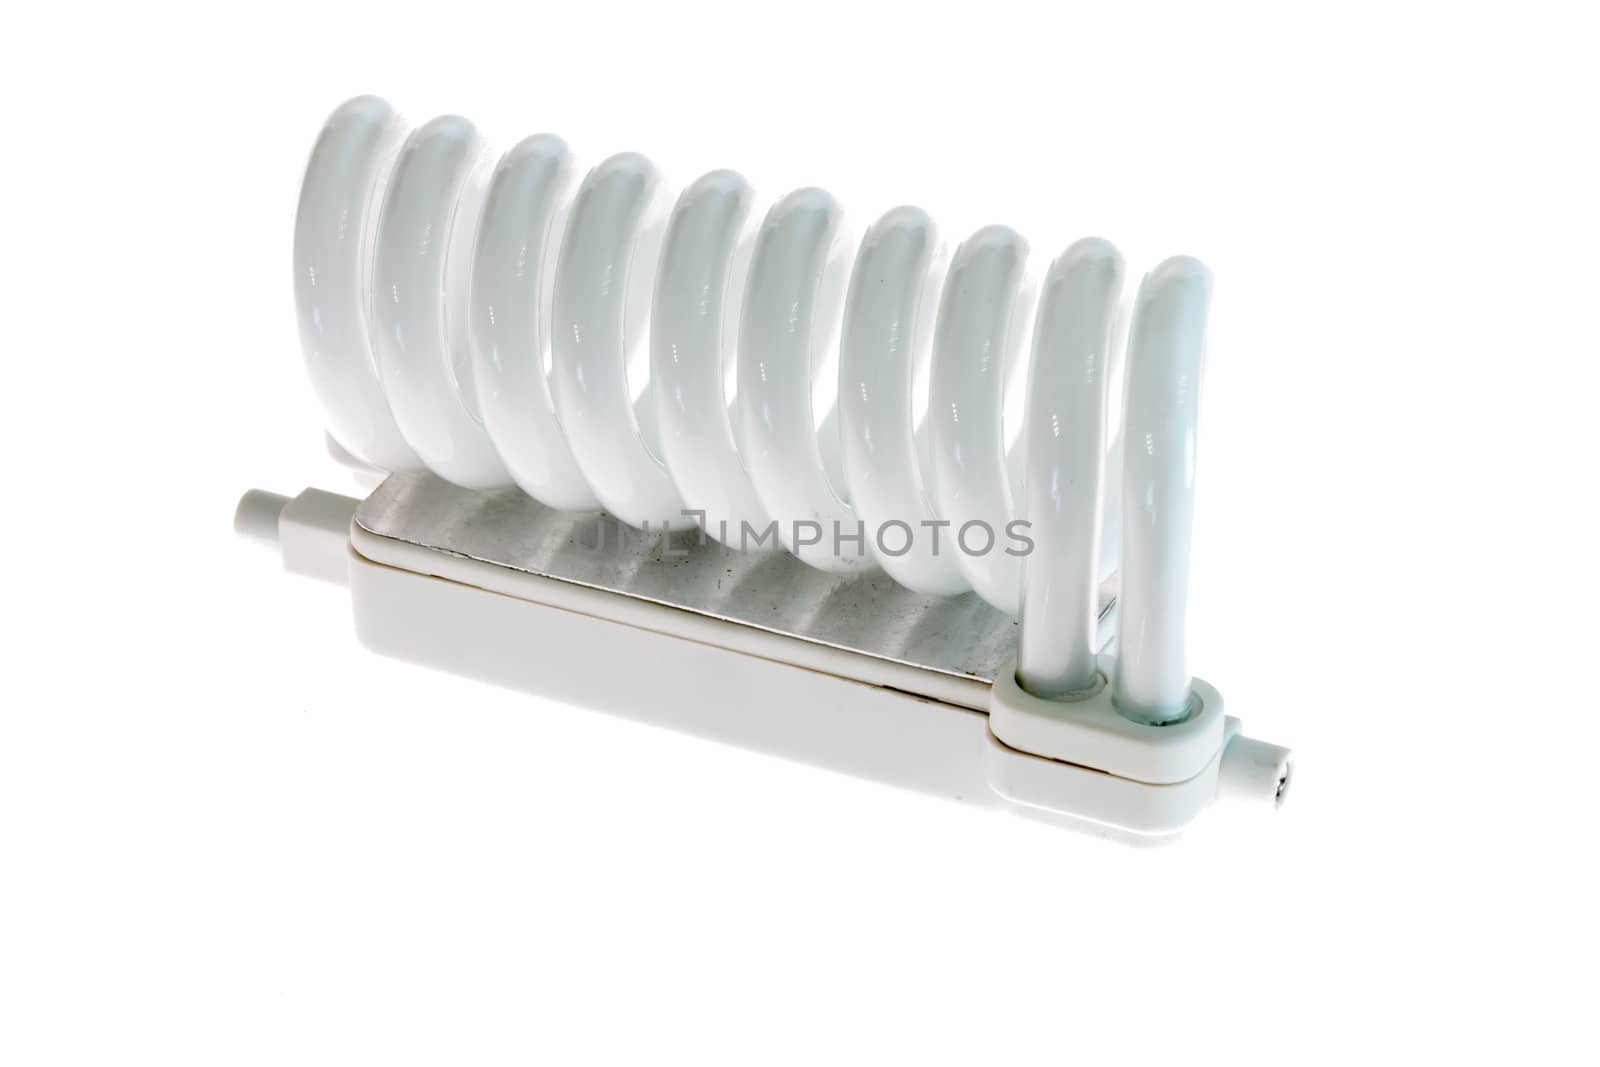 Fluorescent saving lamp various power and form